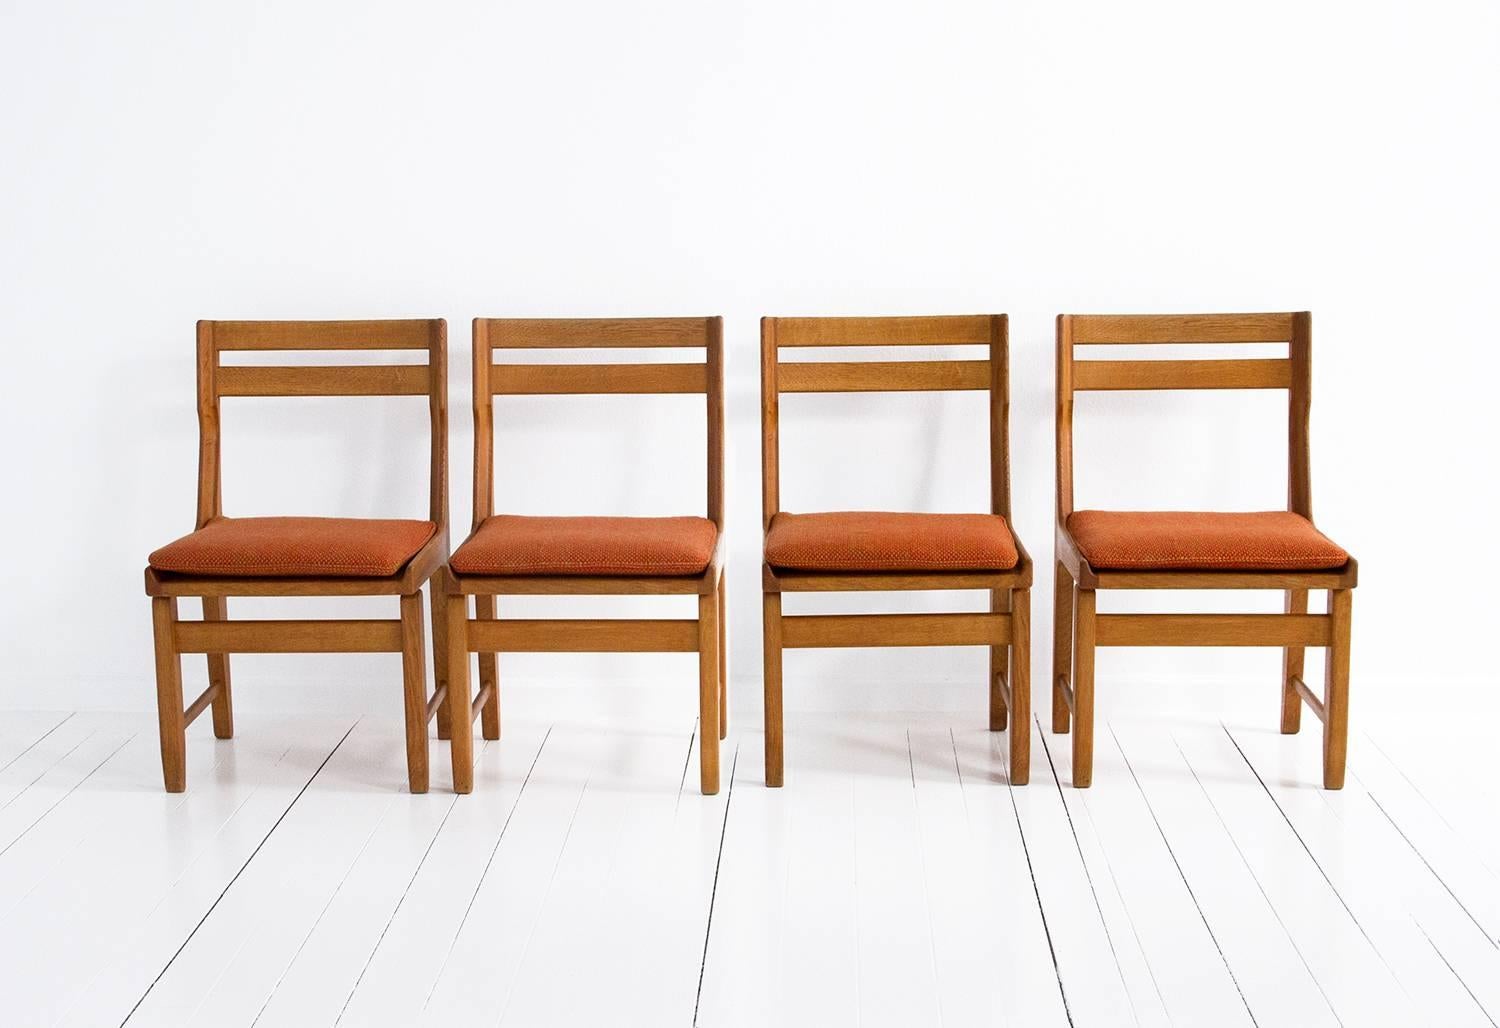 Set of four oak dining chairs by Guillerme and Chambron. 
Made of oakwood,
circa 1960, France.